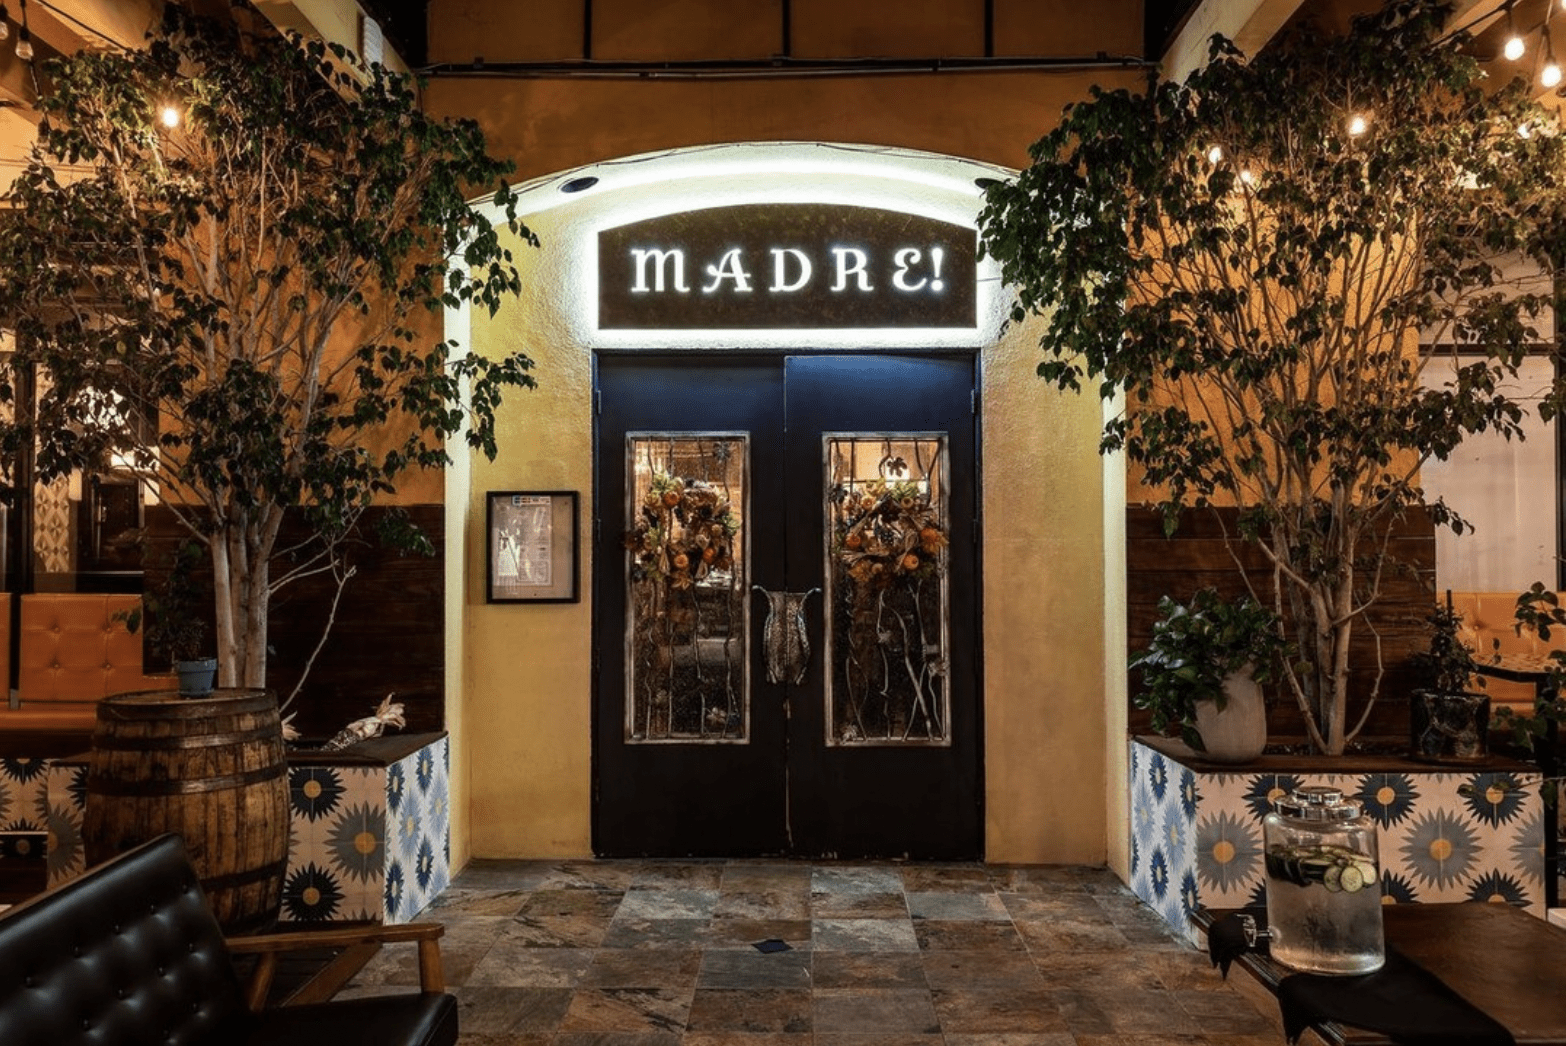 The exterior of Madre restaurant in Los Angeles